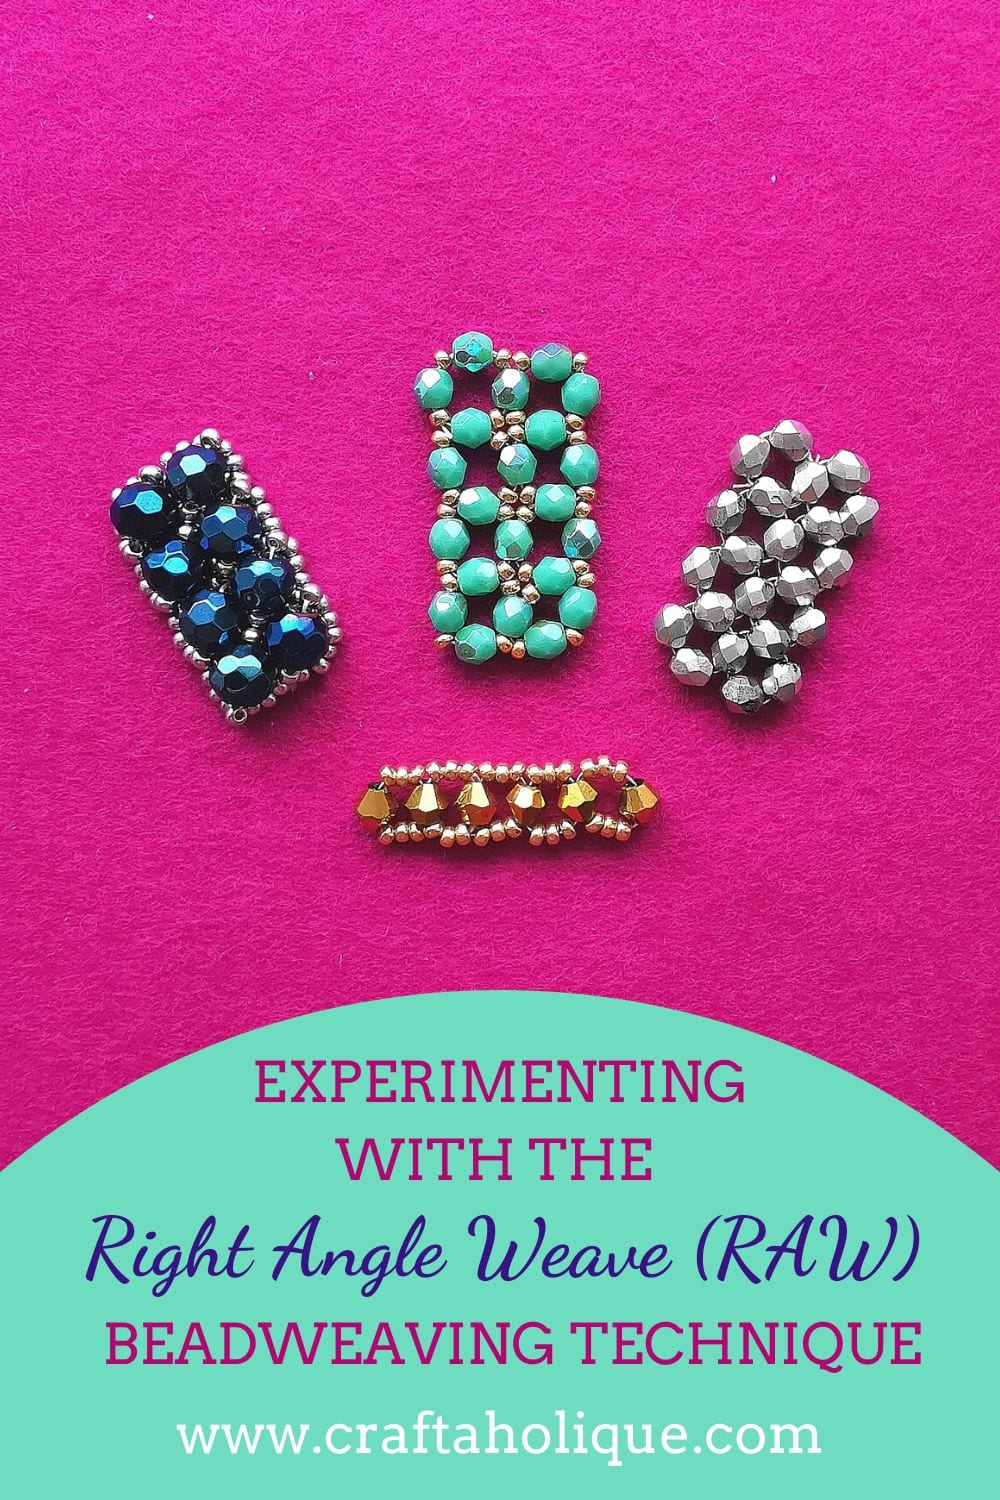 Right angle weave is a great beadweaving stitch to add to your repertoire, if you're a beader. You can create many different styles of jewellery and beading projects with it. Check out this post for examples of different designs.